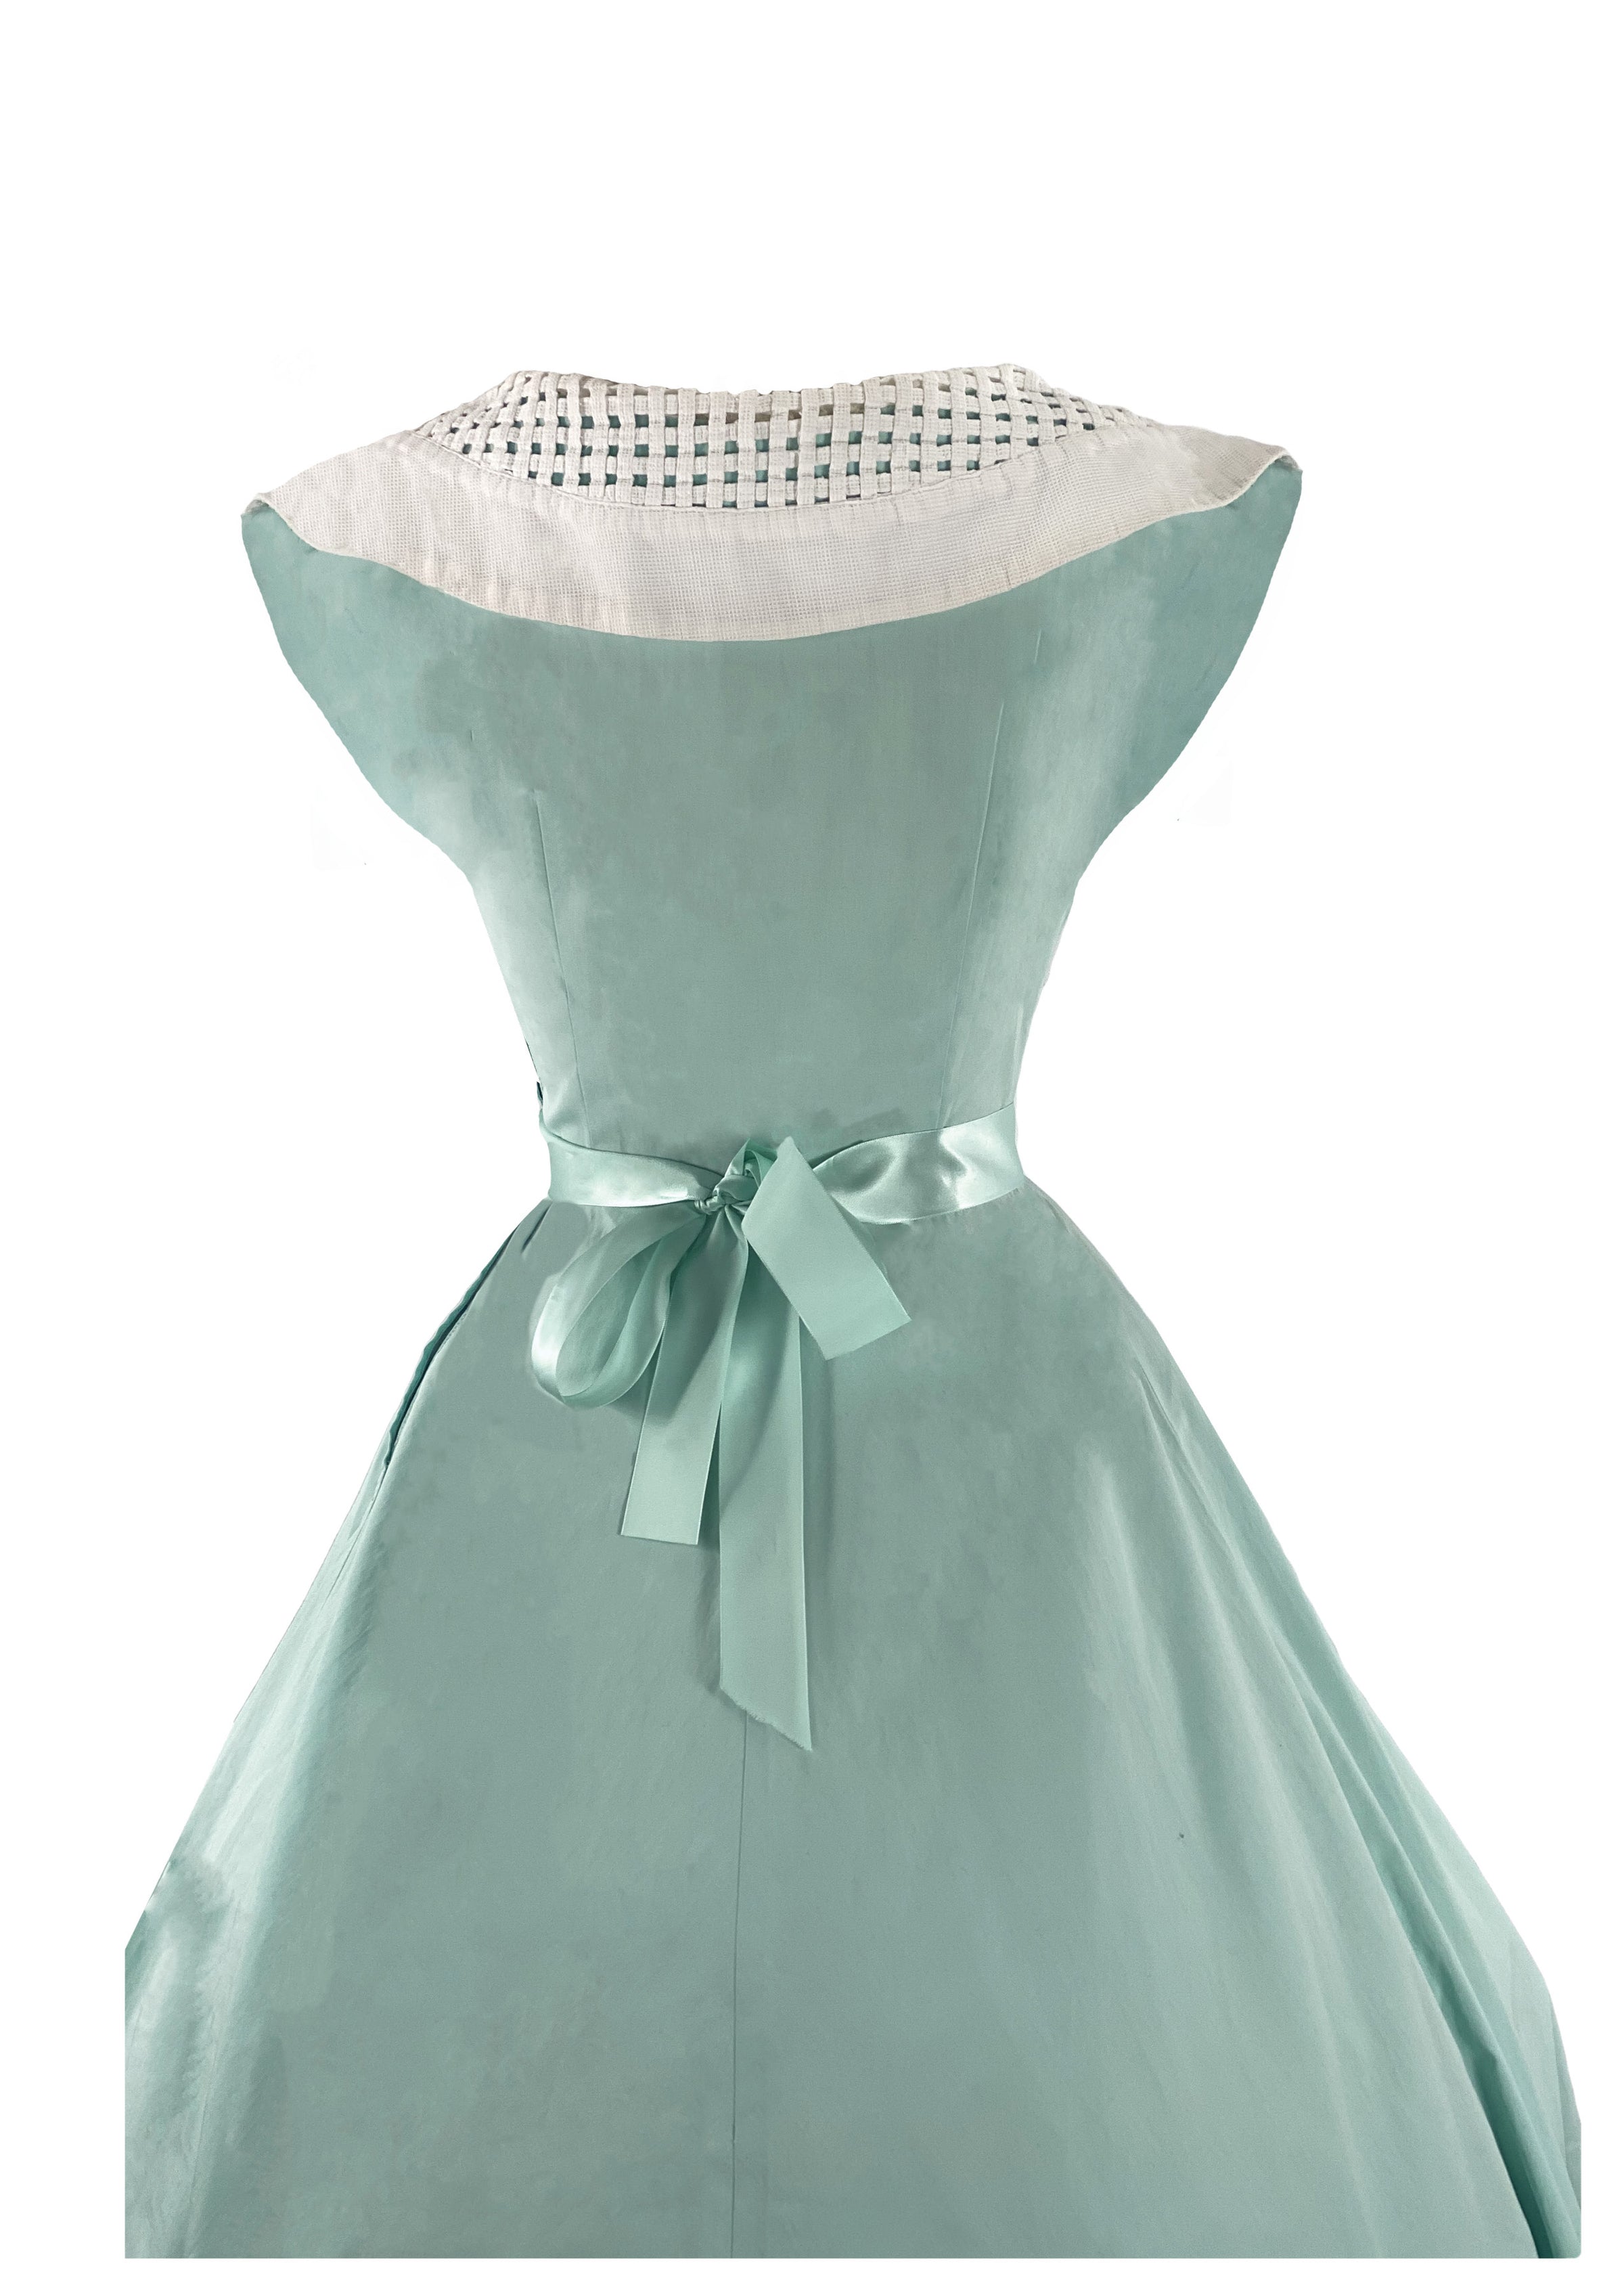 Vintage 50S To Early 60S Mint Green Cotton Dress- New! – Coutura Vintage